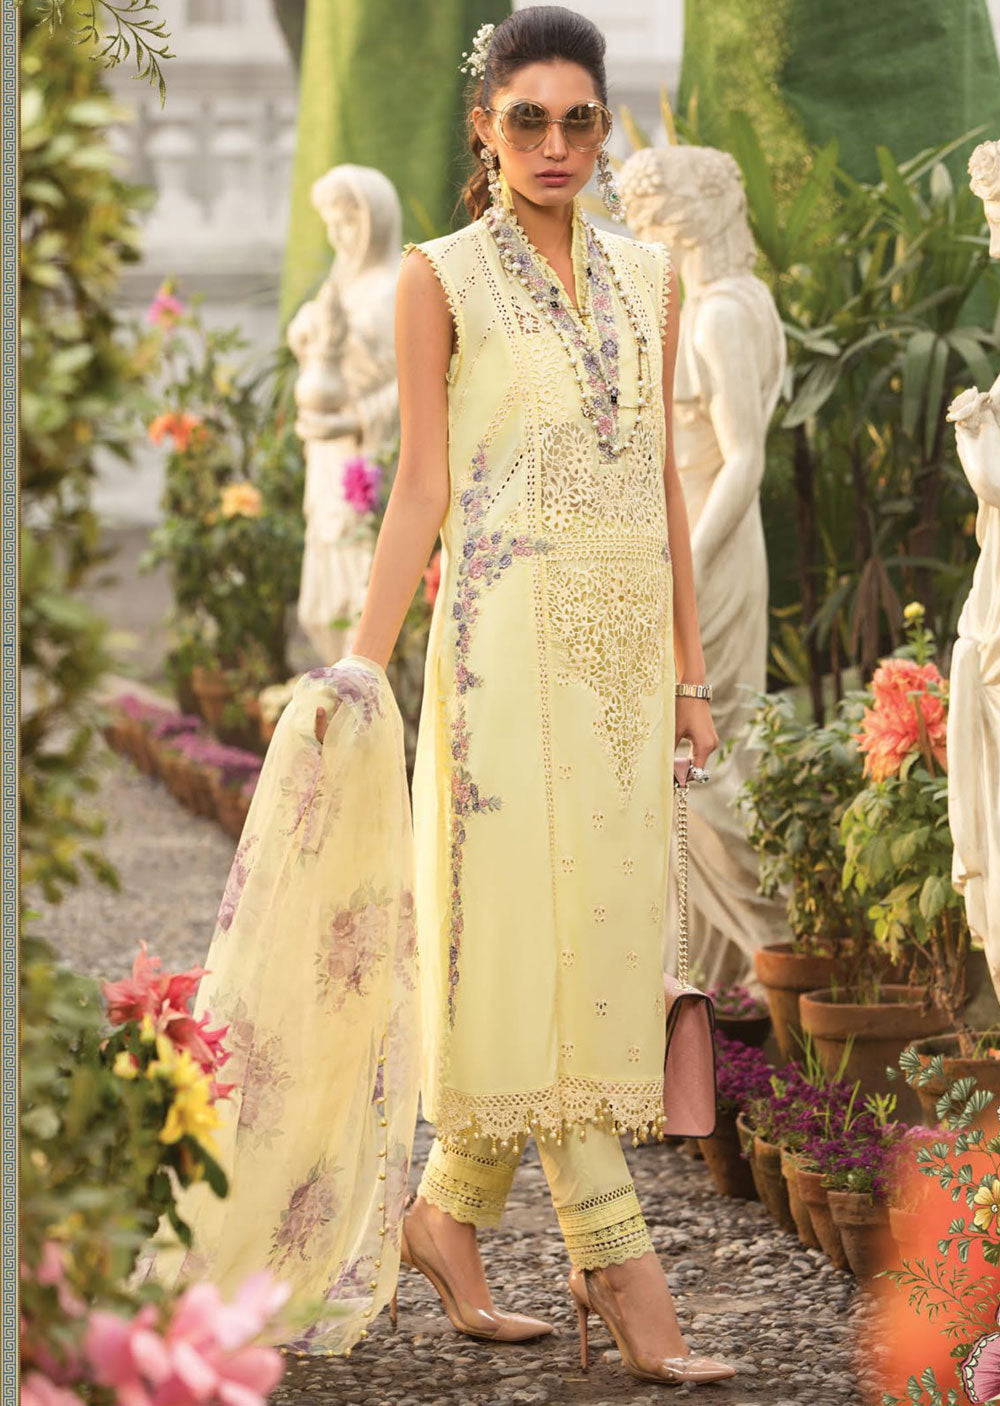 MBR-06-B - Readymade Maria B Inspired Lawn Suit - Memsaab Online